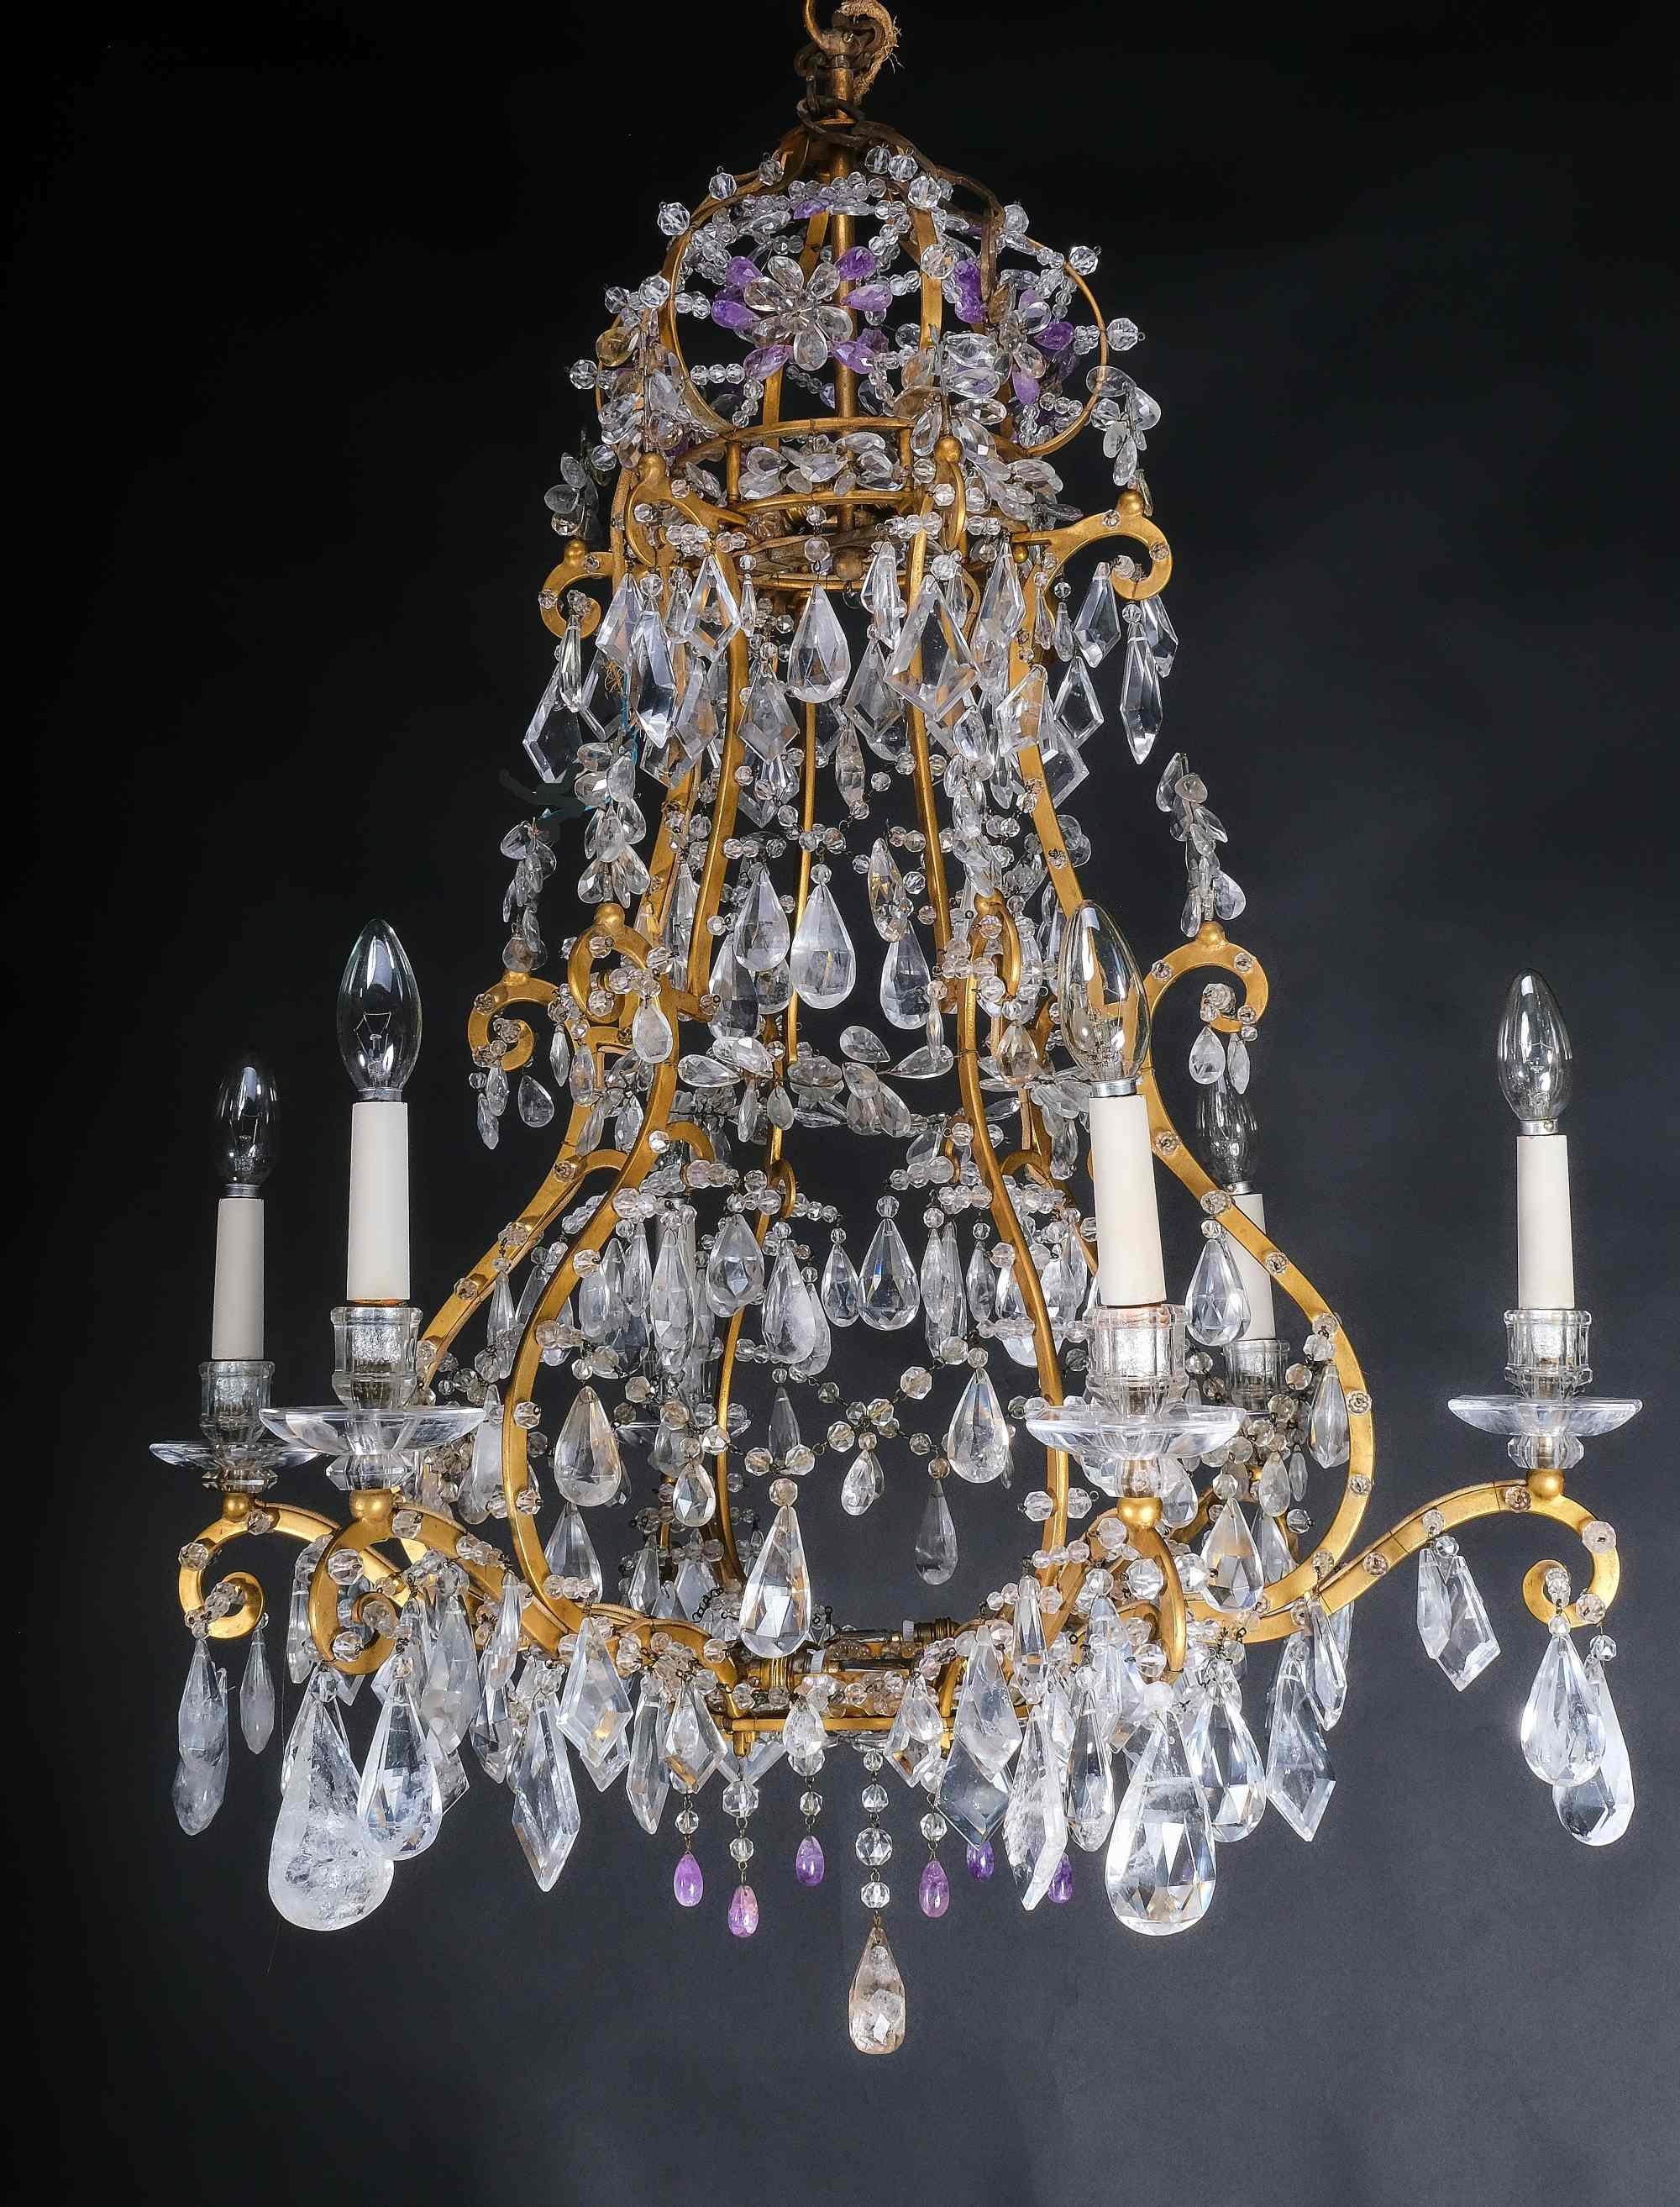 Very finely worked, patinated and gilded wrought iron and gilded chandelier, with six lights and others integrated. Magnificent hanging in rock crystal and amethyst very good quality. Very rich and fine hanging in rock crystal with accents of